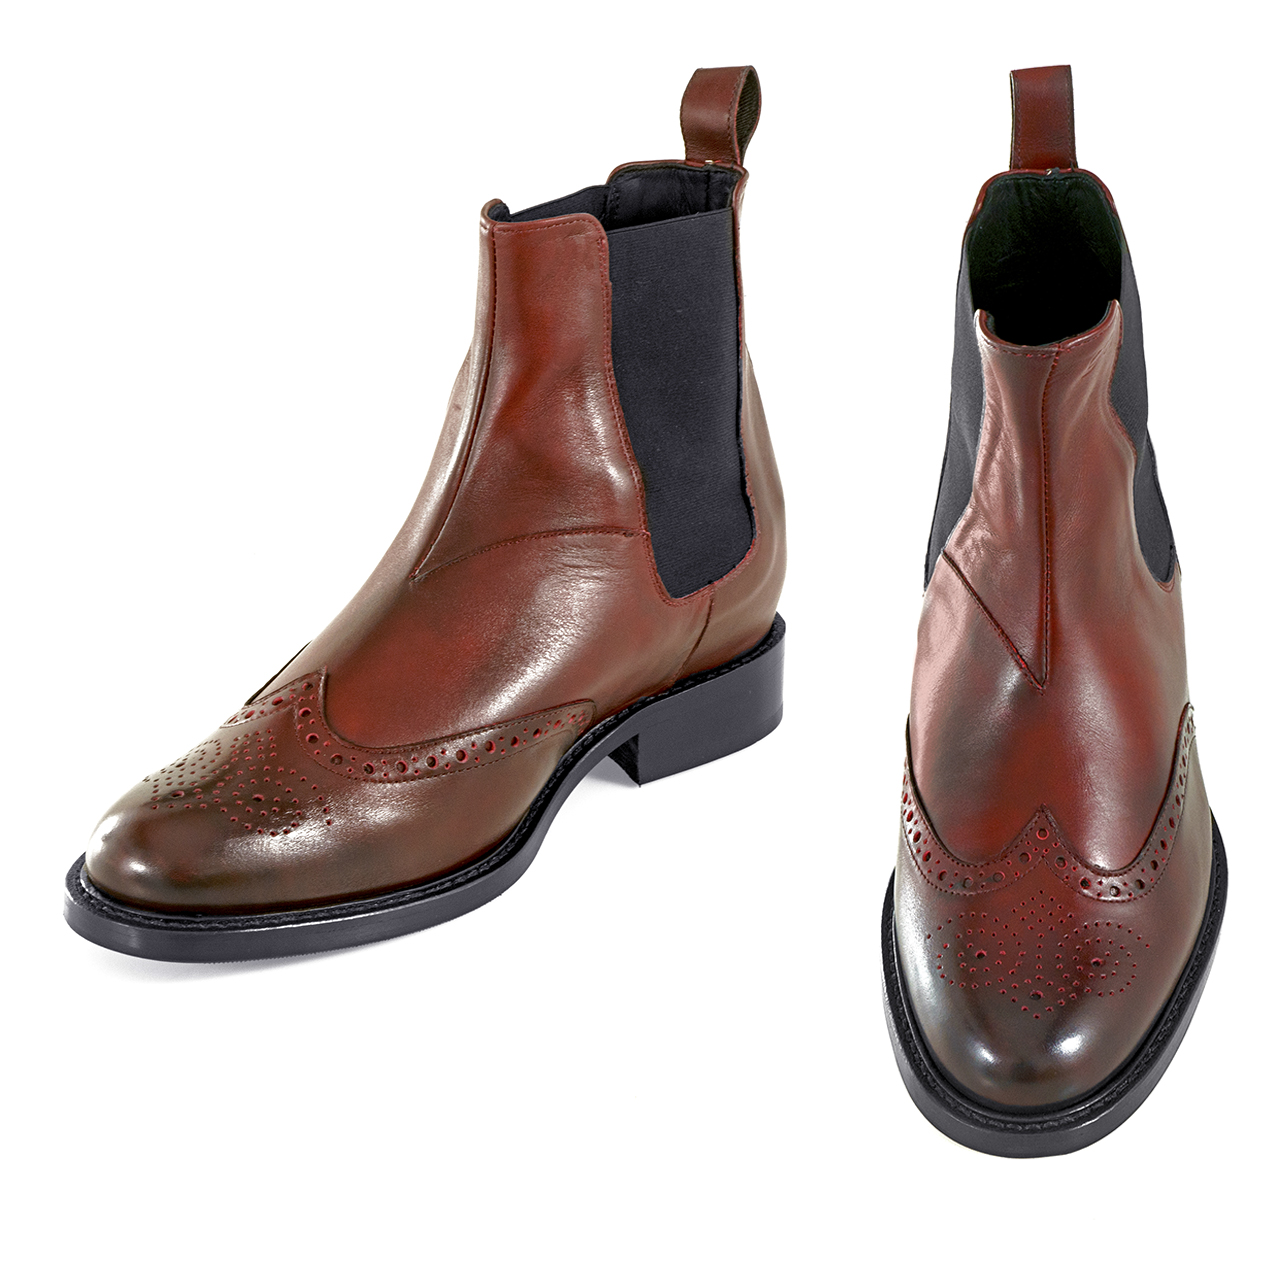 Almas Tower - Elevator Boots in Brushed Leather from 2.4 to 4 inches